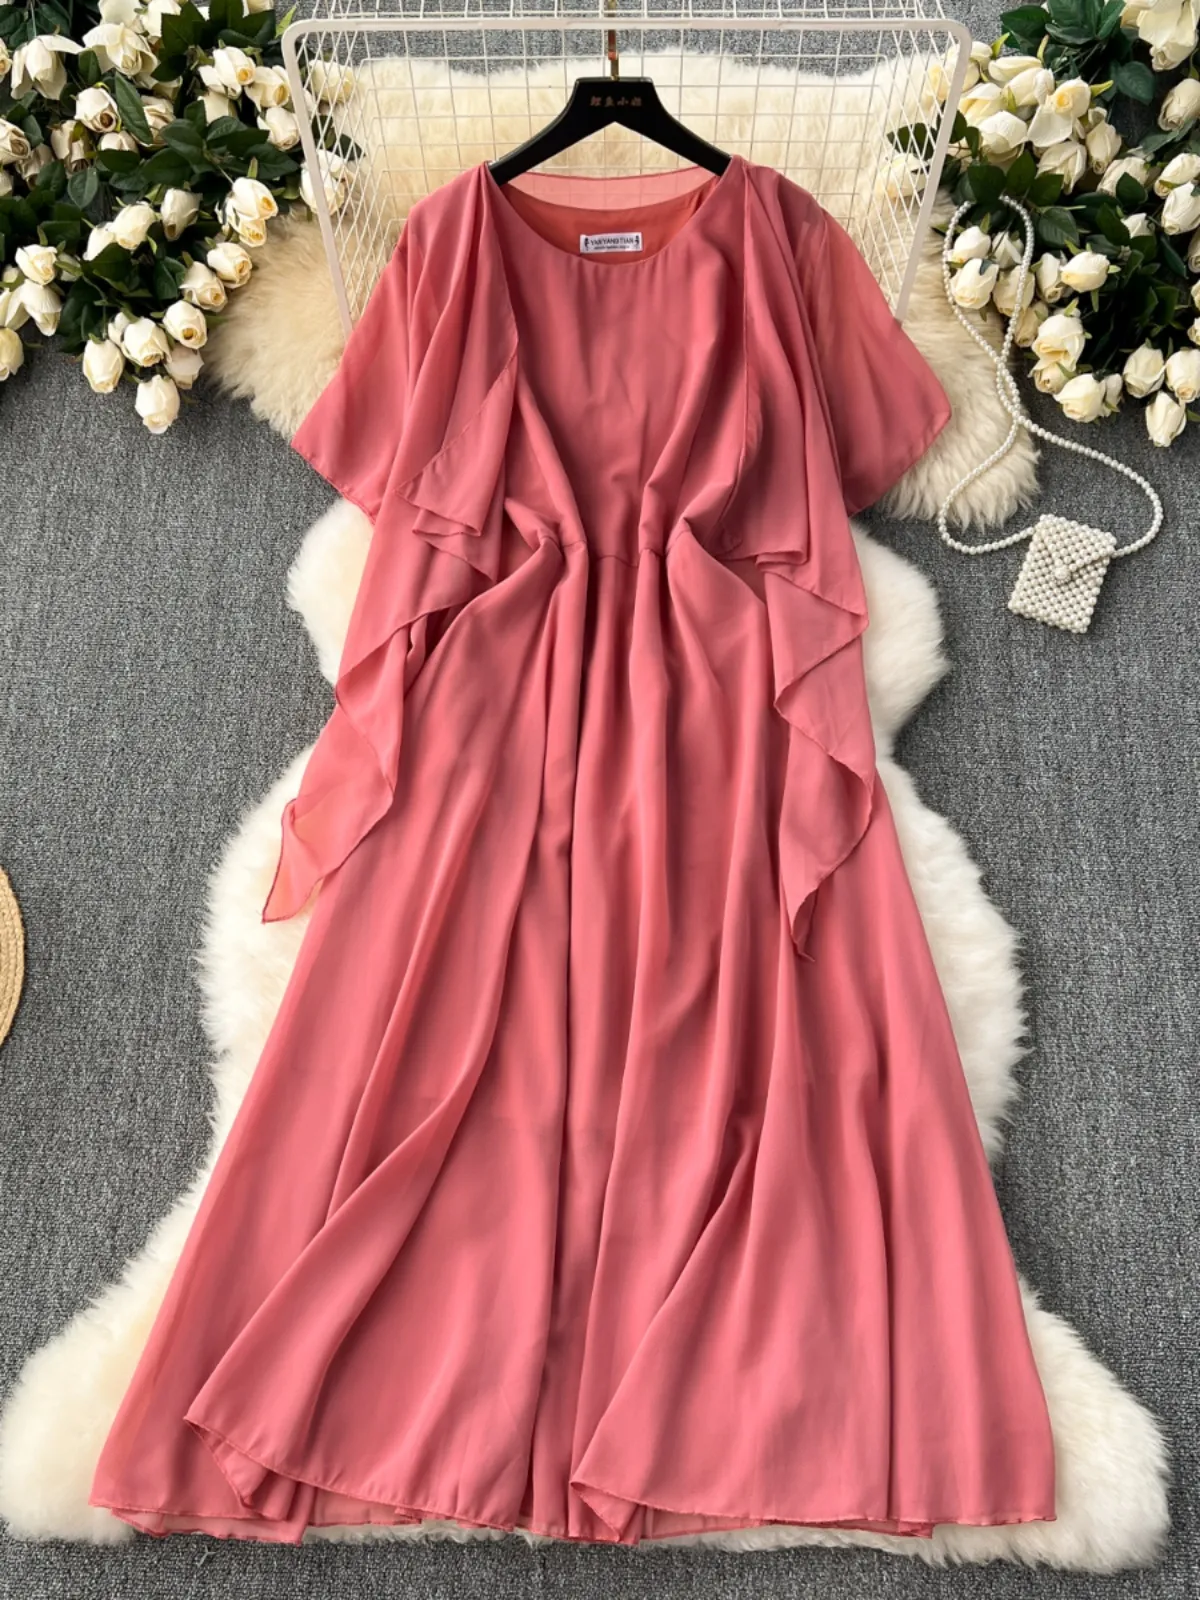 Summer new two-piece set for women, light and mature style, niche, high waisted, versatile sleeveless vest, dress, and shawl jacket